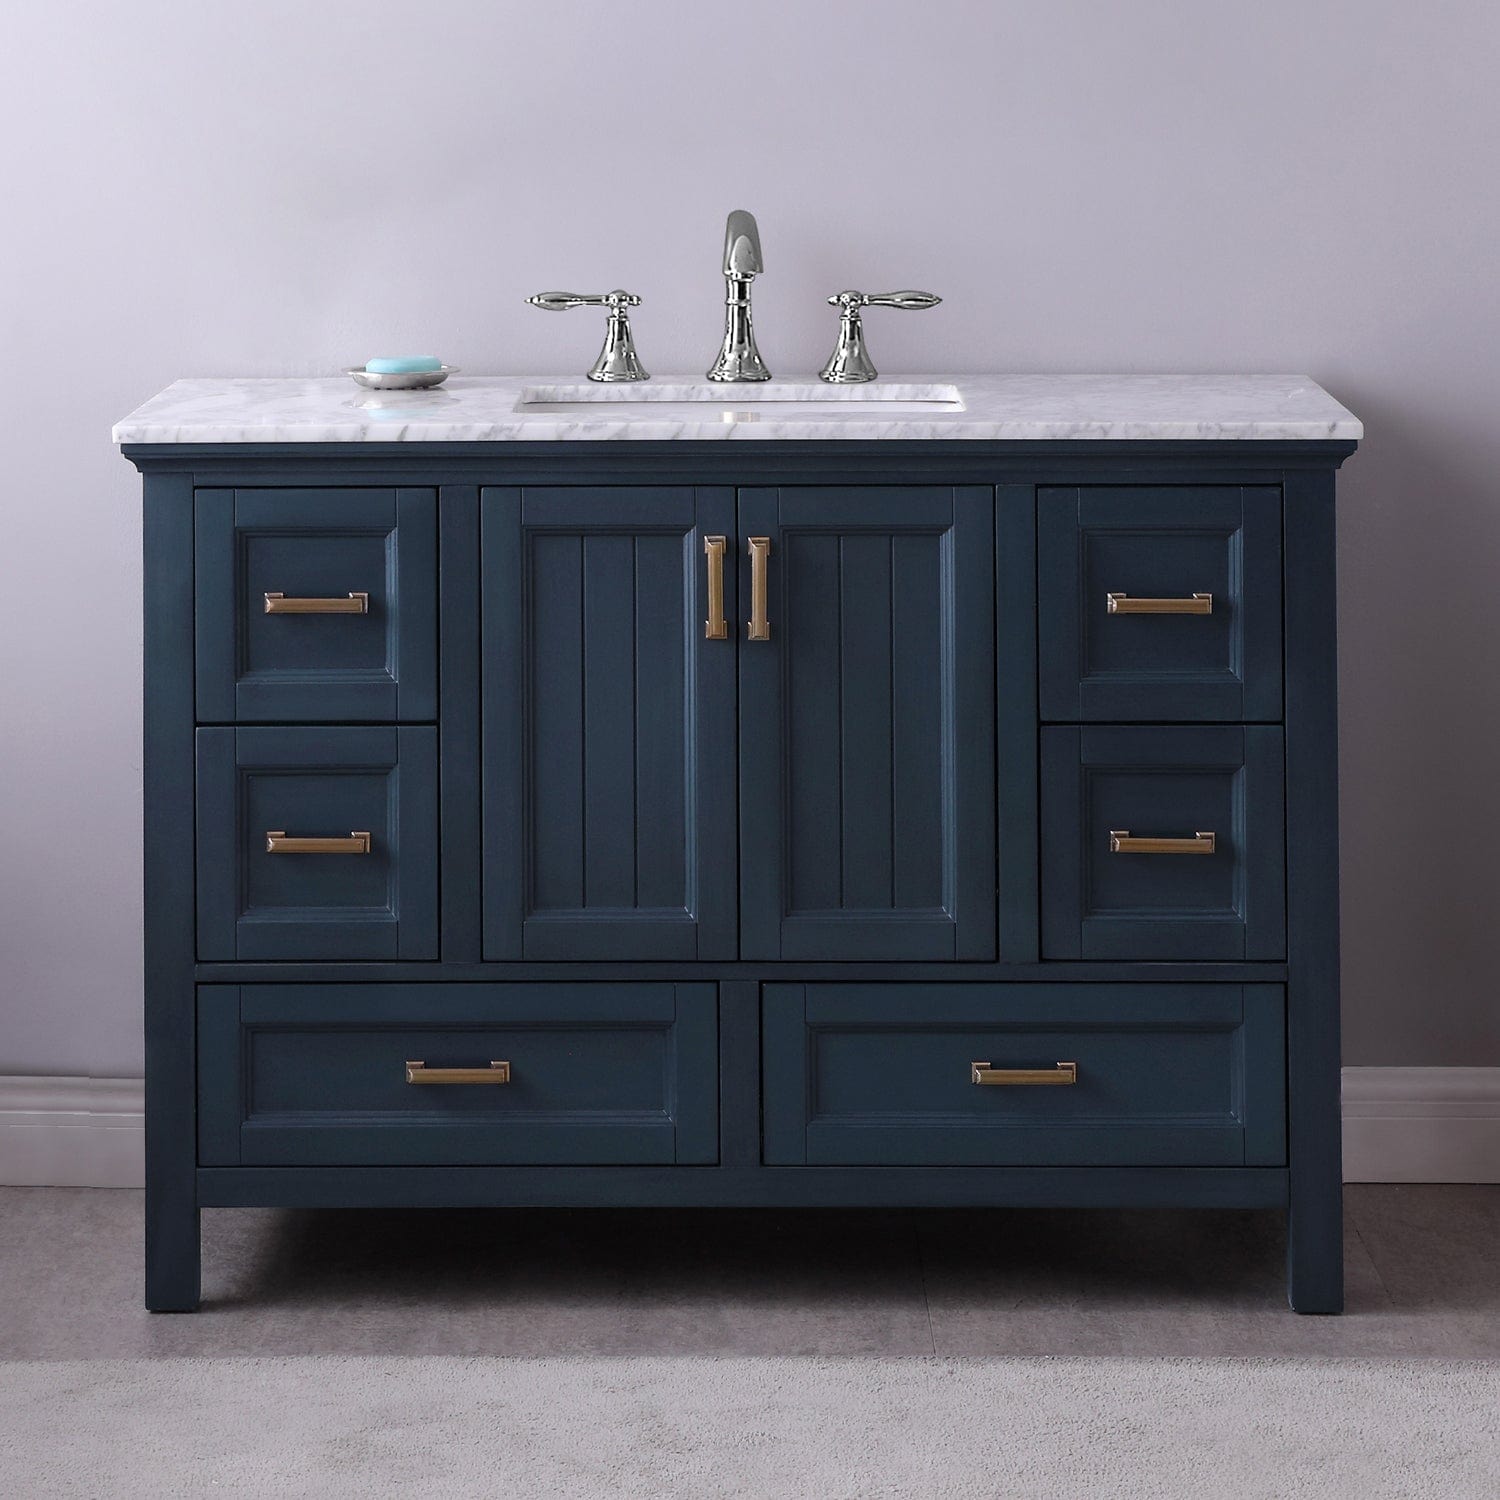 Altair Isla 48" Single Bathroom Vanity Set in Classic Blue and Carrara White Marble Countertop without Mirror 538048-CB-CA-NM - Molaix631112970860Vanity538048-CB-CA-NM